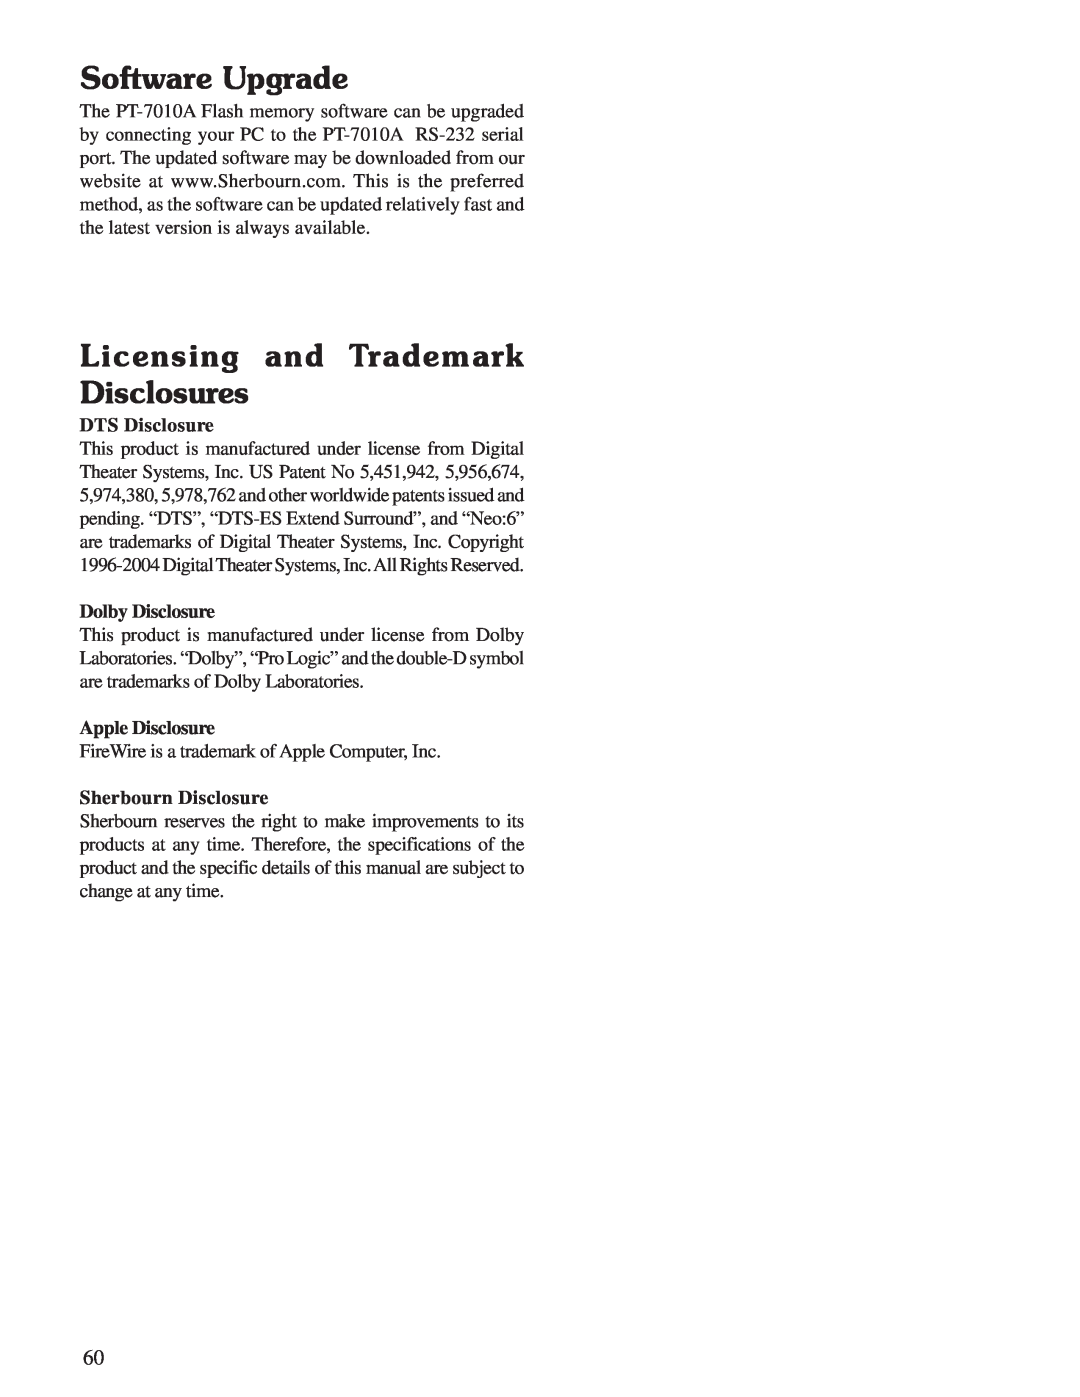 Sherbourn Technologies PT-7010A Software Upgrade, Licensing and Trademark Disclosures, DTS Disclosure, Dolby Disclosure 